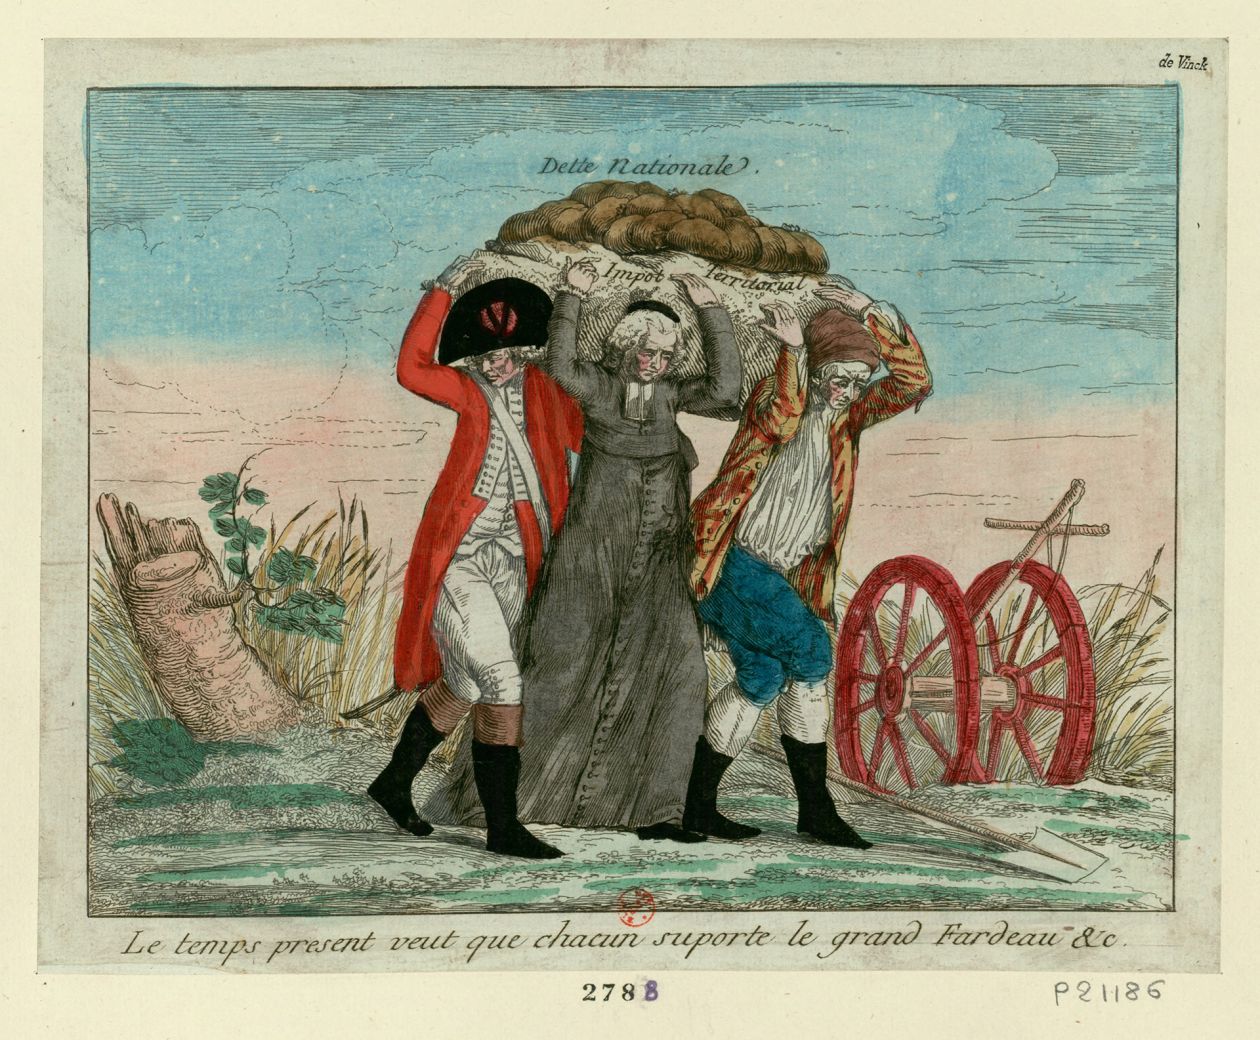 Image of an etching showing a soldier, a clergyman, and a peasant carrying equally carrying the weight on their shoulders of the "dette Nationale" from France, 1789